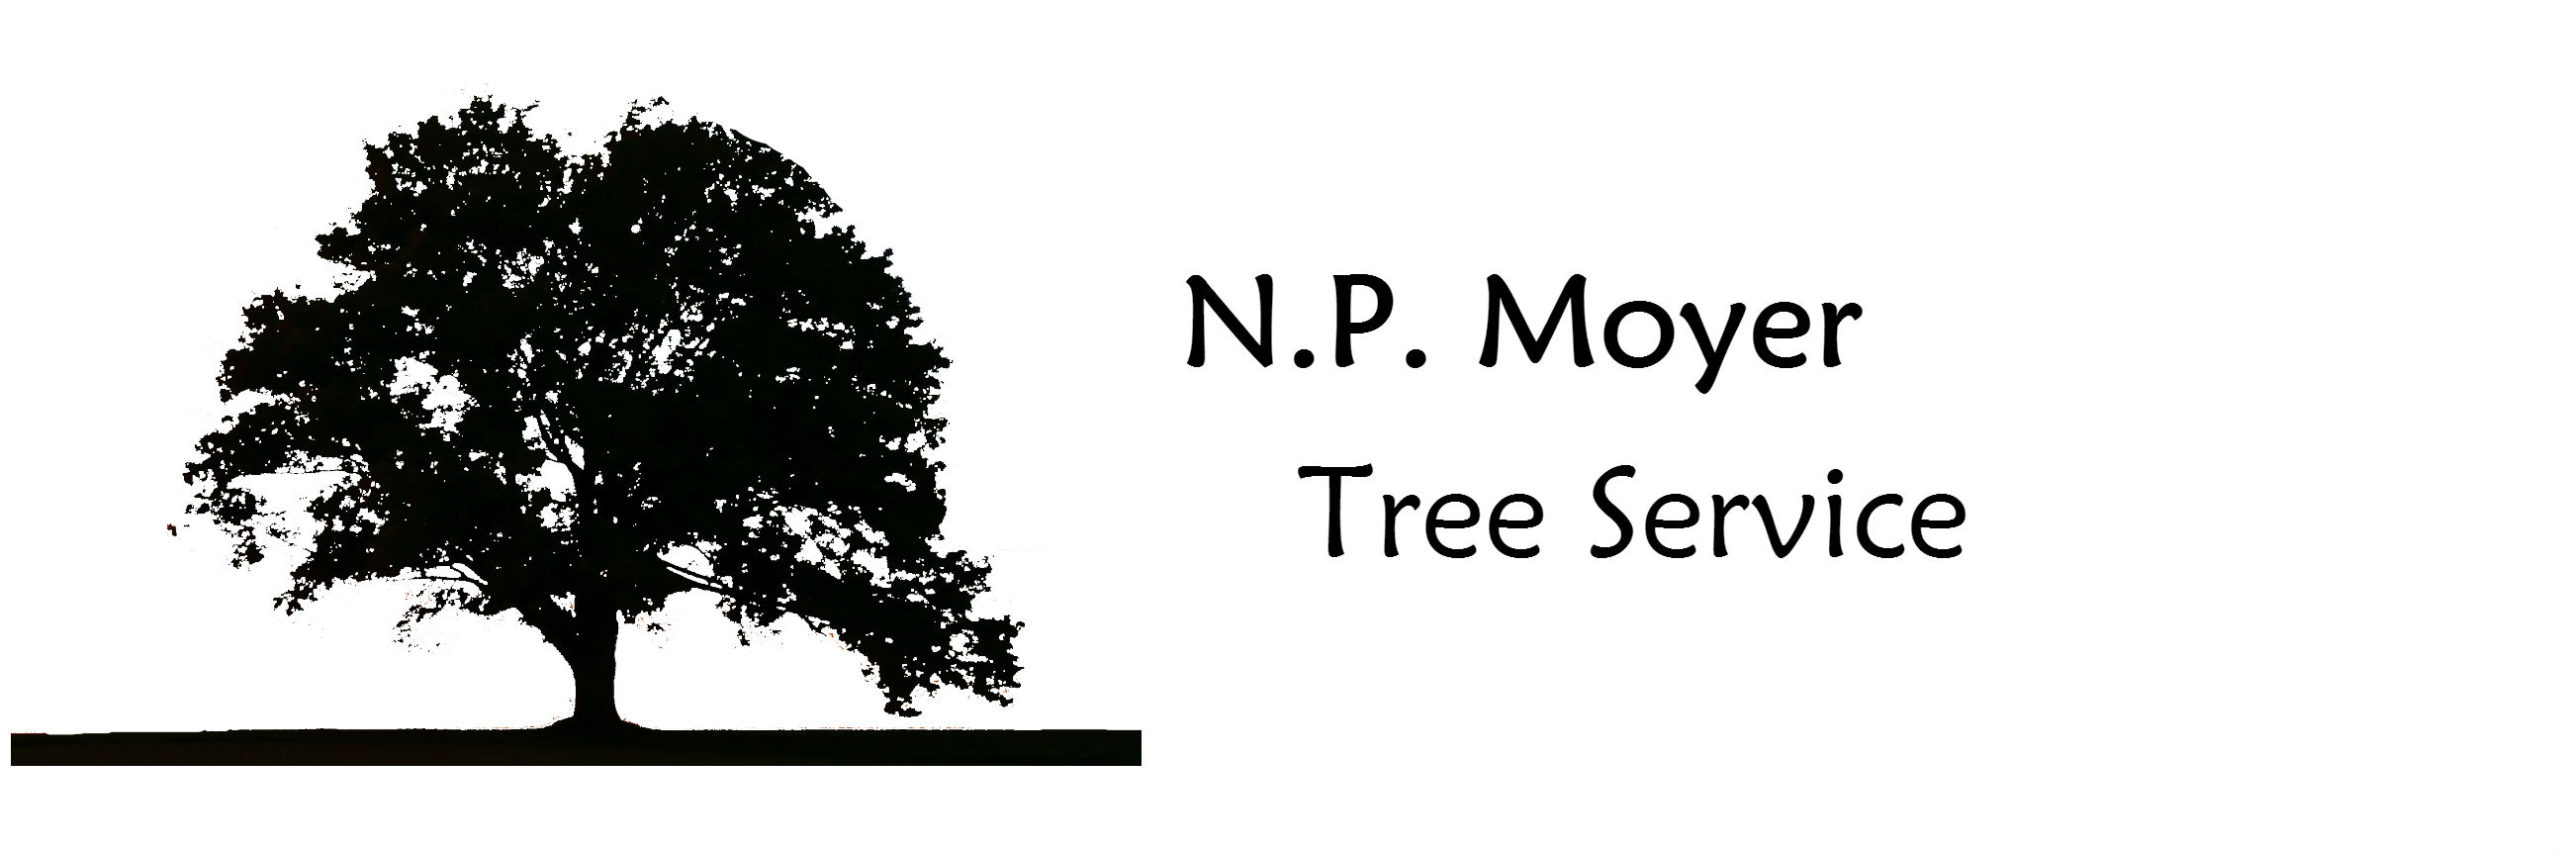 The Top Tree Removal Service company in Bucks & Montgomery Count PA gives us a call or fill out the form on our website